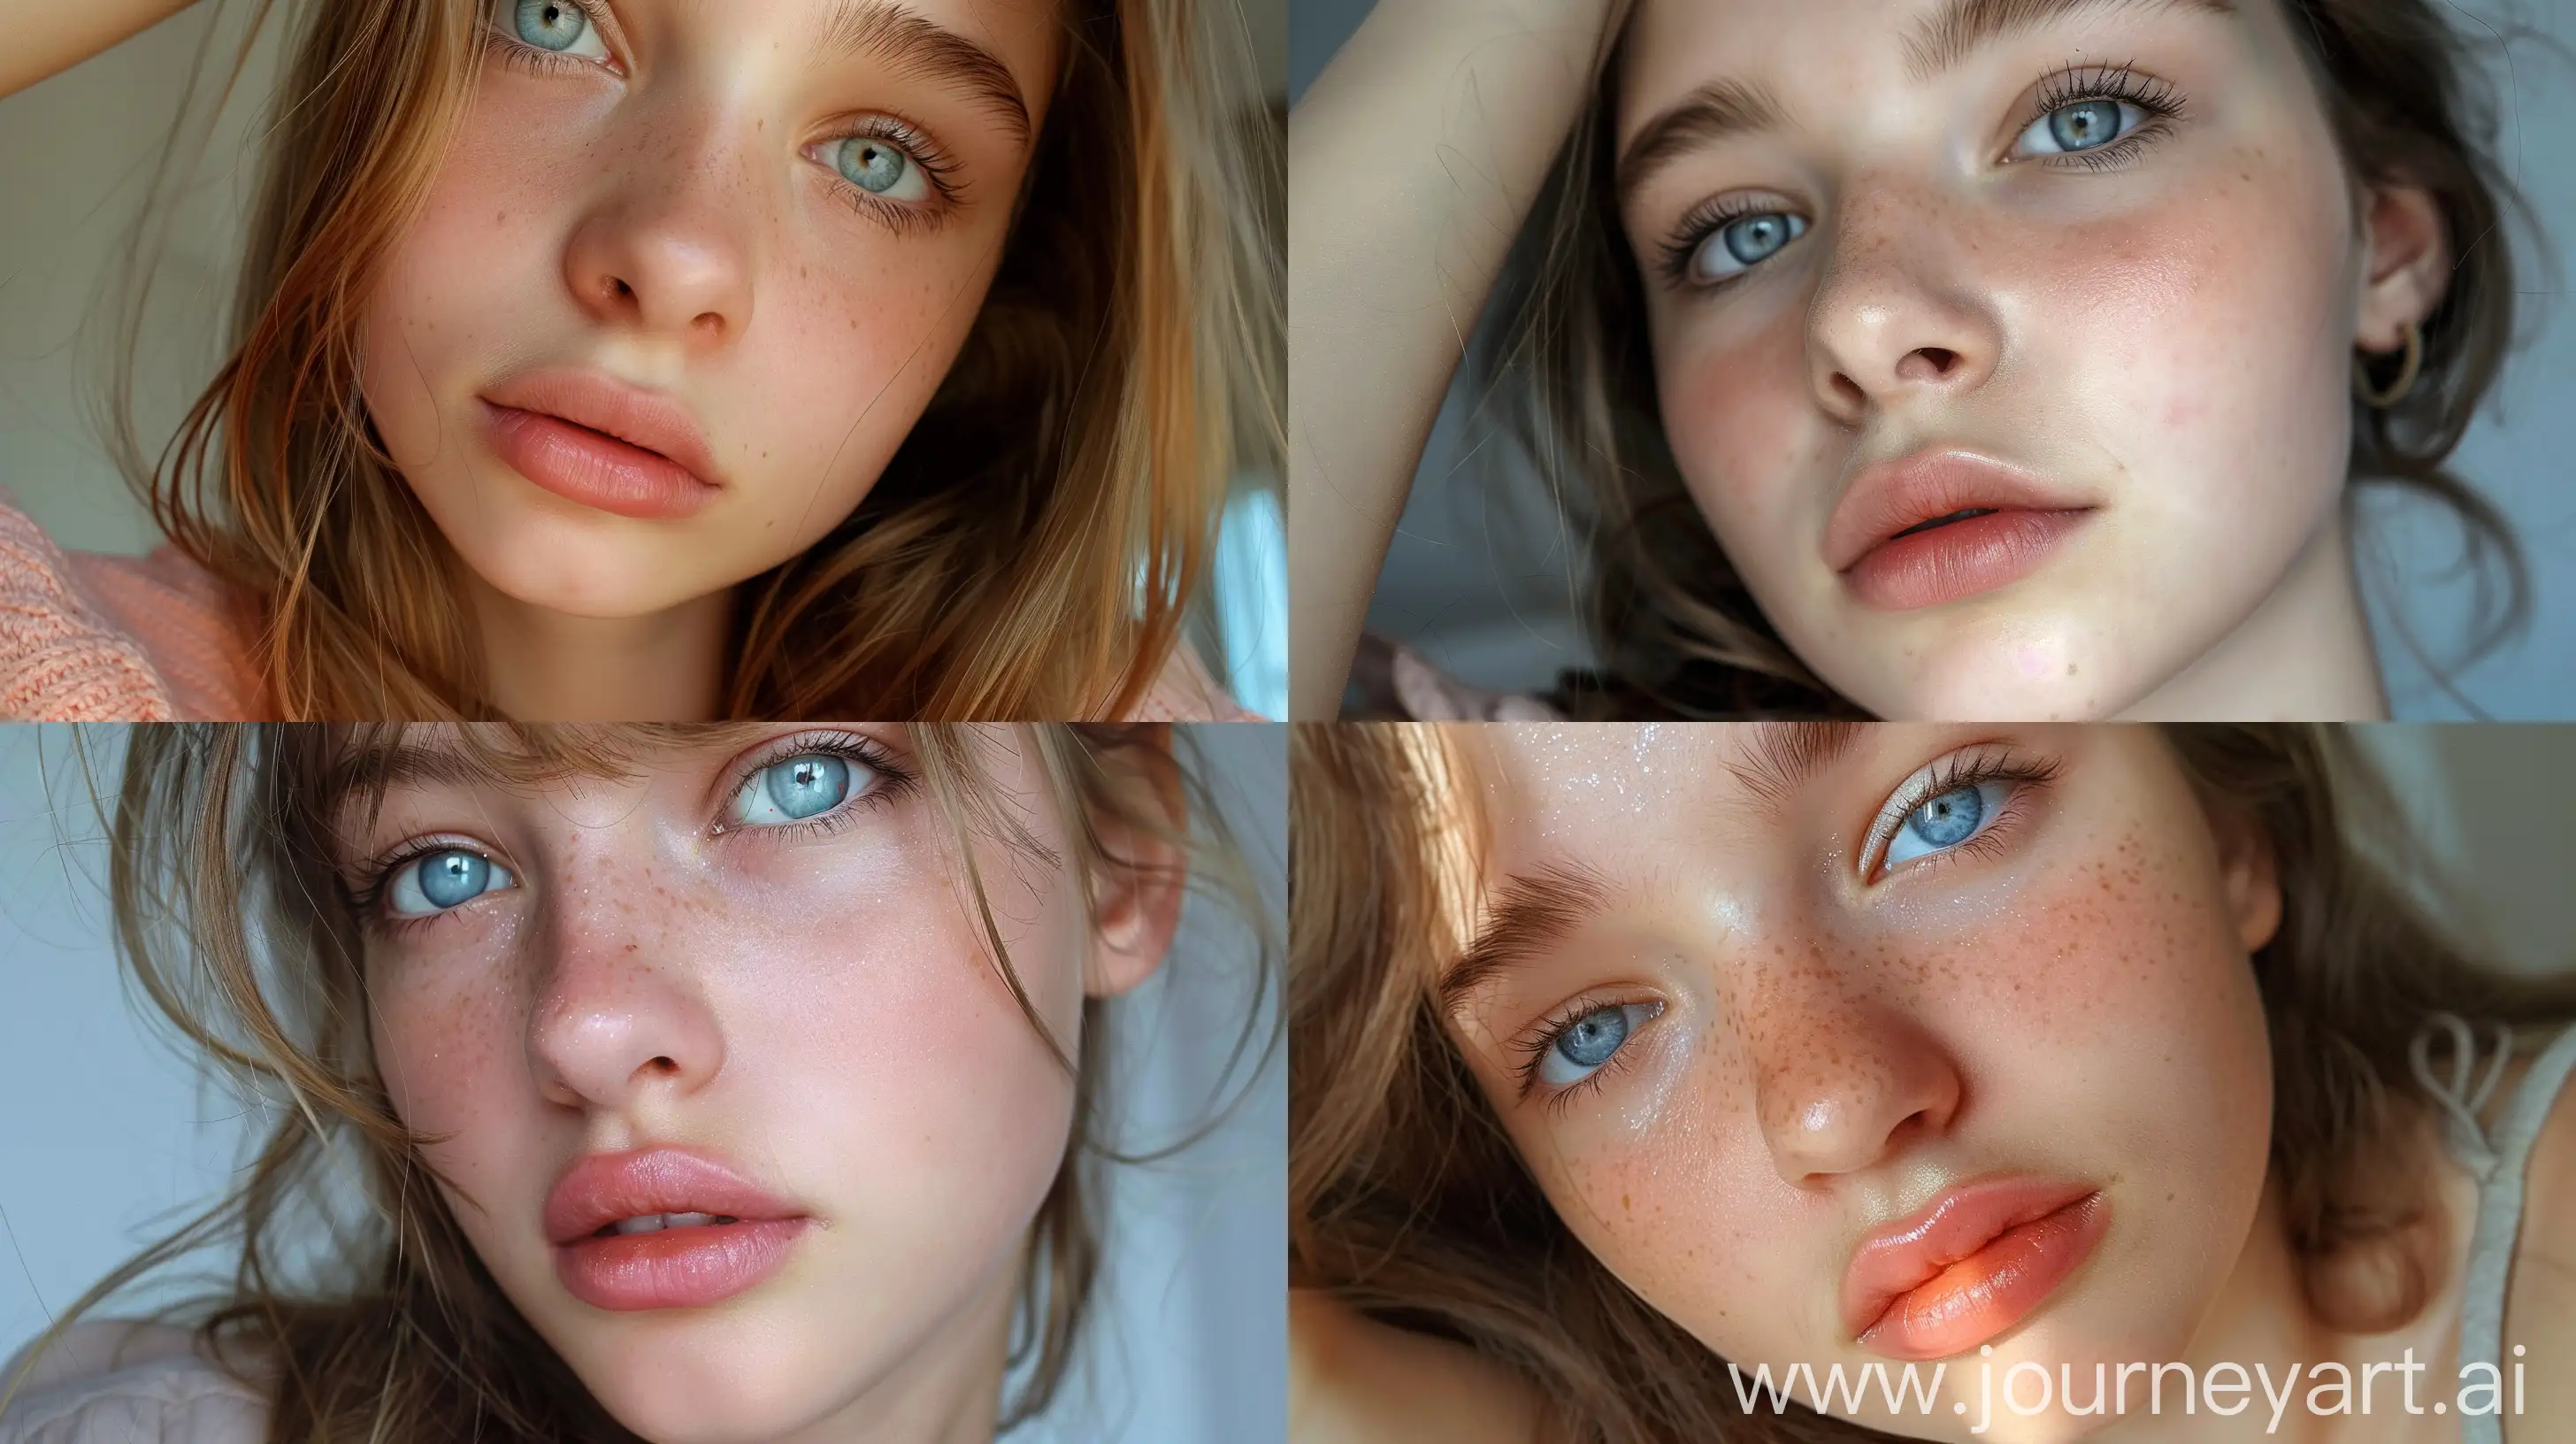 Young-Girl-in-Comfortable-Fashion-Takes-Selfie-with-Light-Blue-Eyes